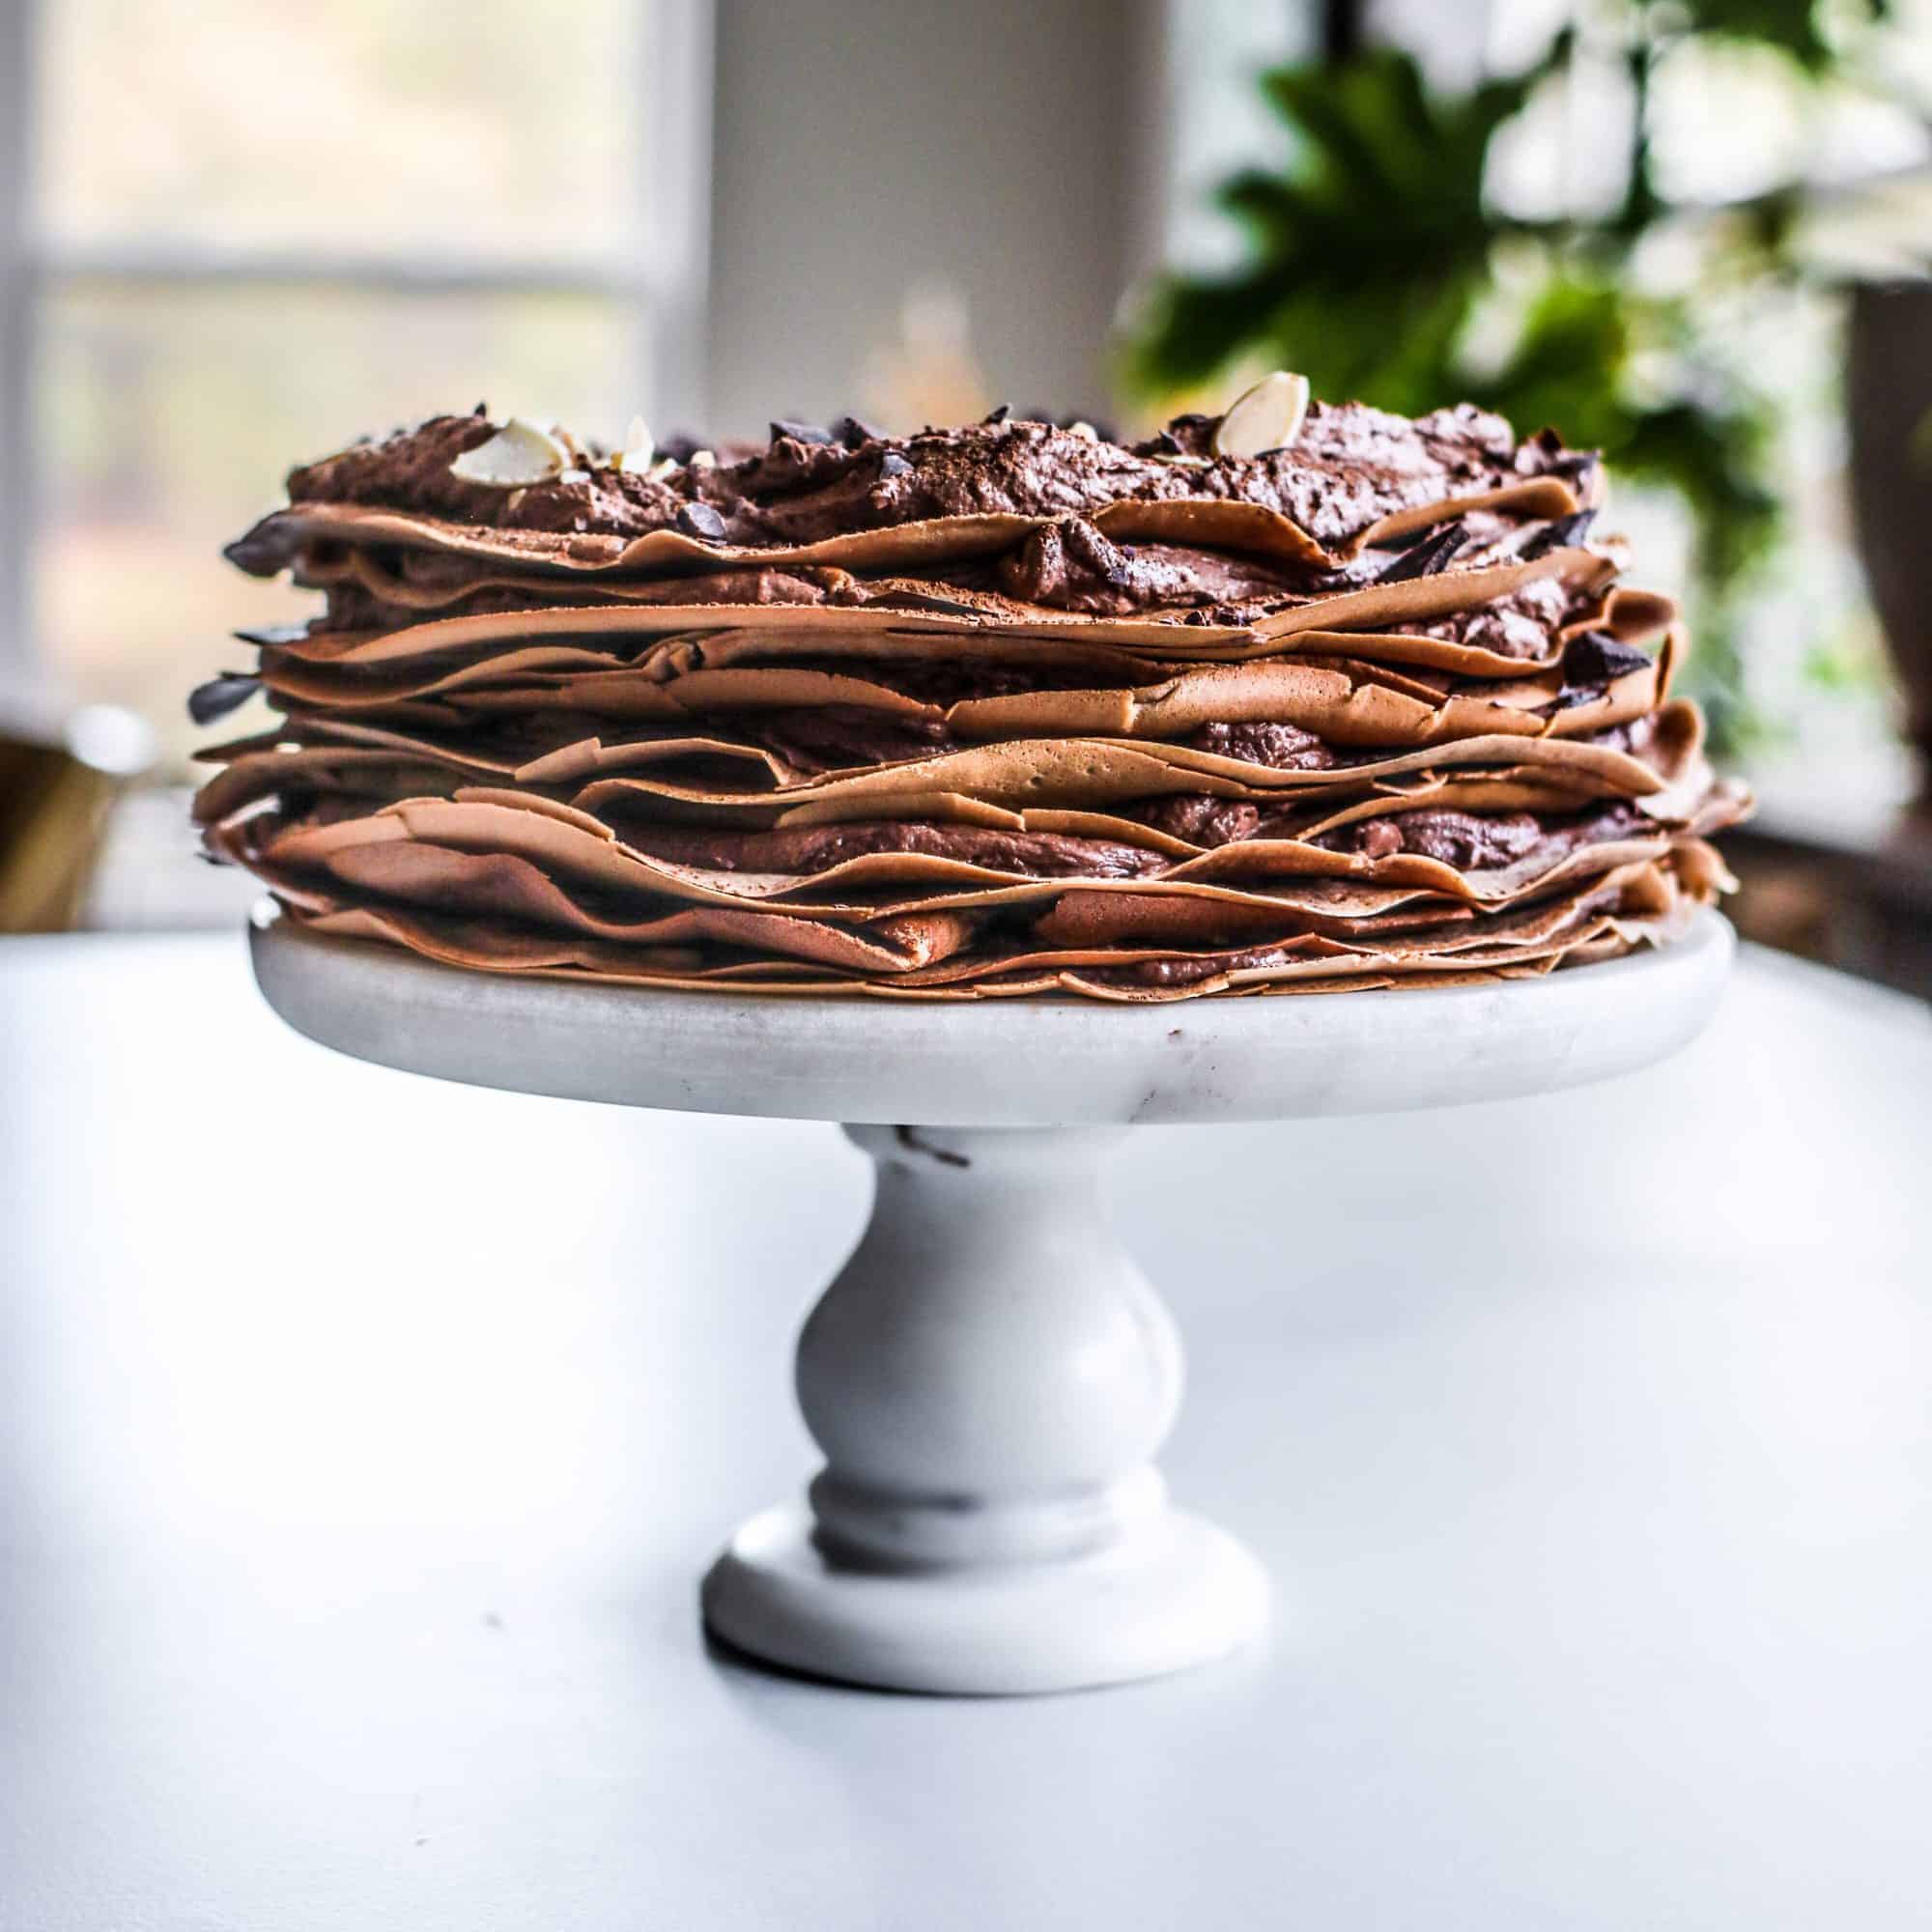 chocolate crepes layered to make a chocolate crepe cake are stacked on a cake plate